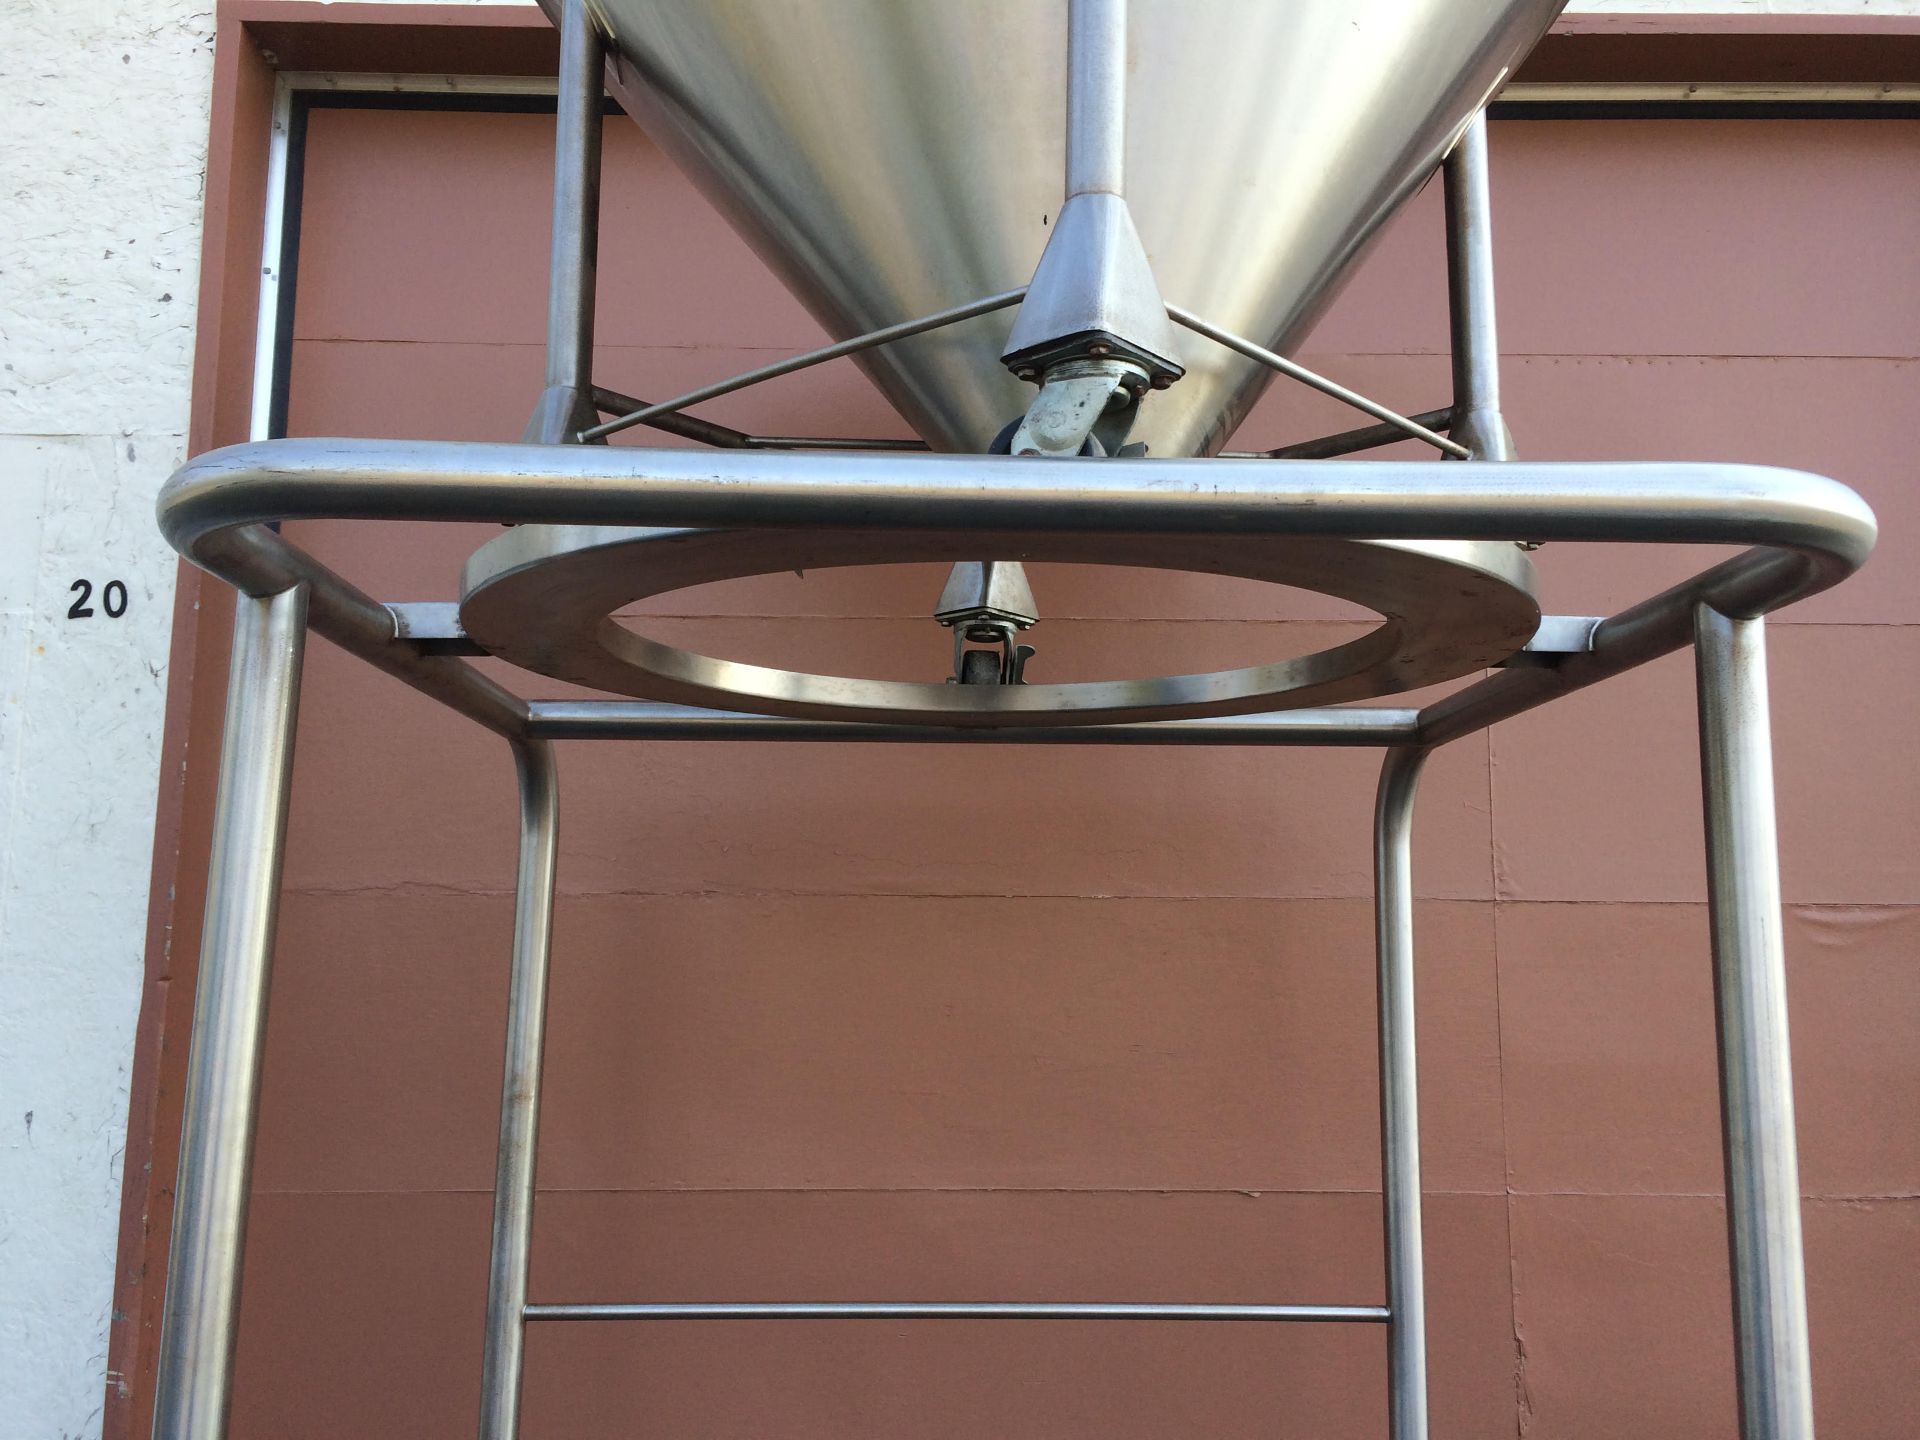 Lot of 2 large stainless steel hoppers with two-part lids and support for emptying. The hoppers - Image 7 of 8